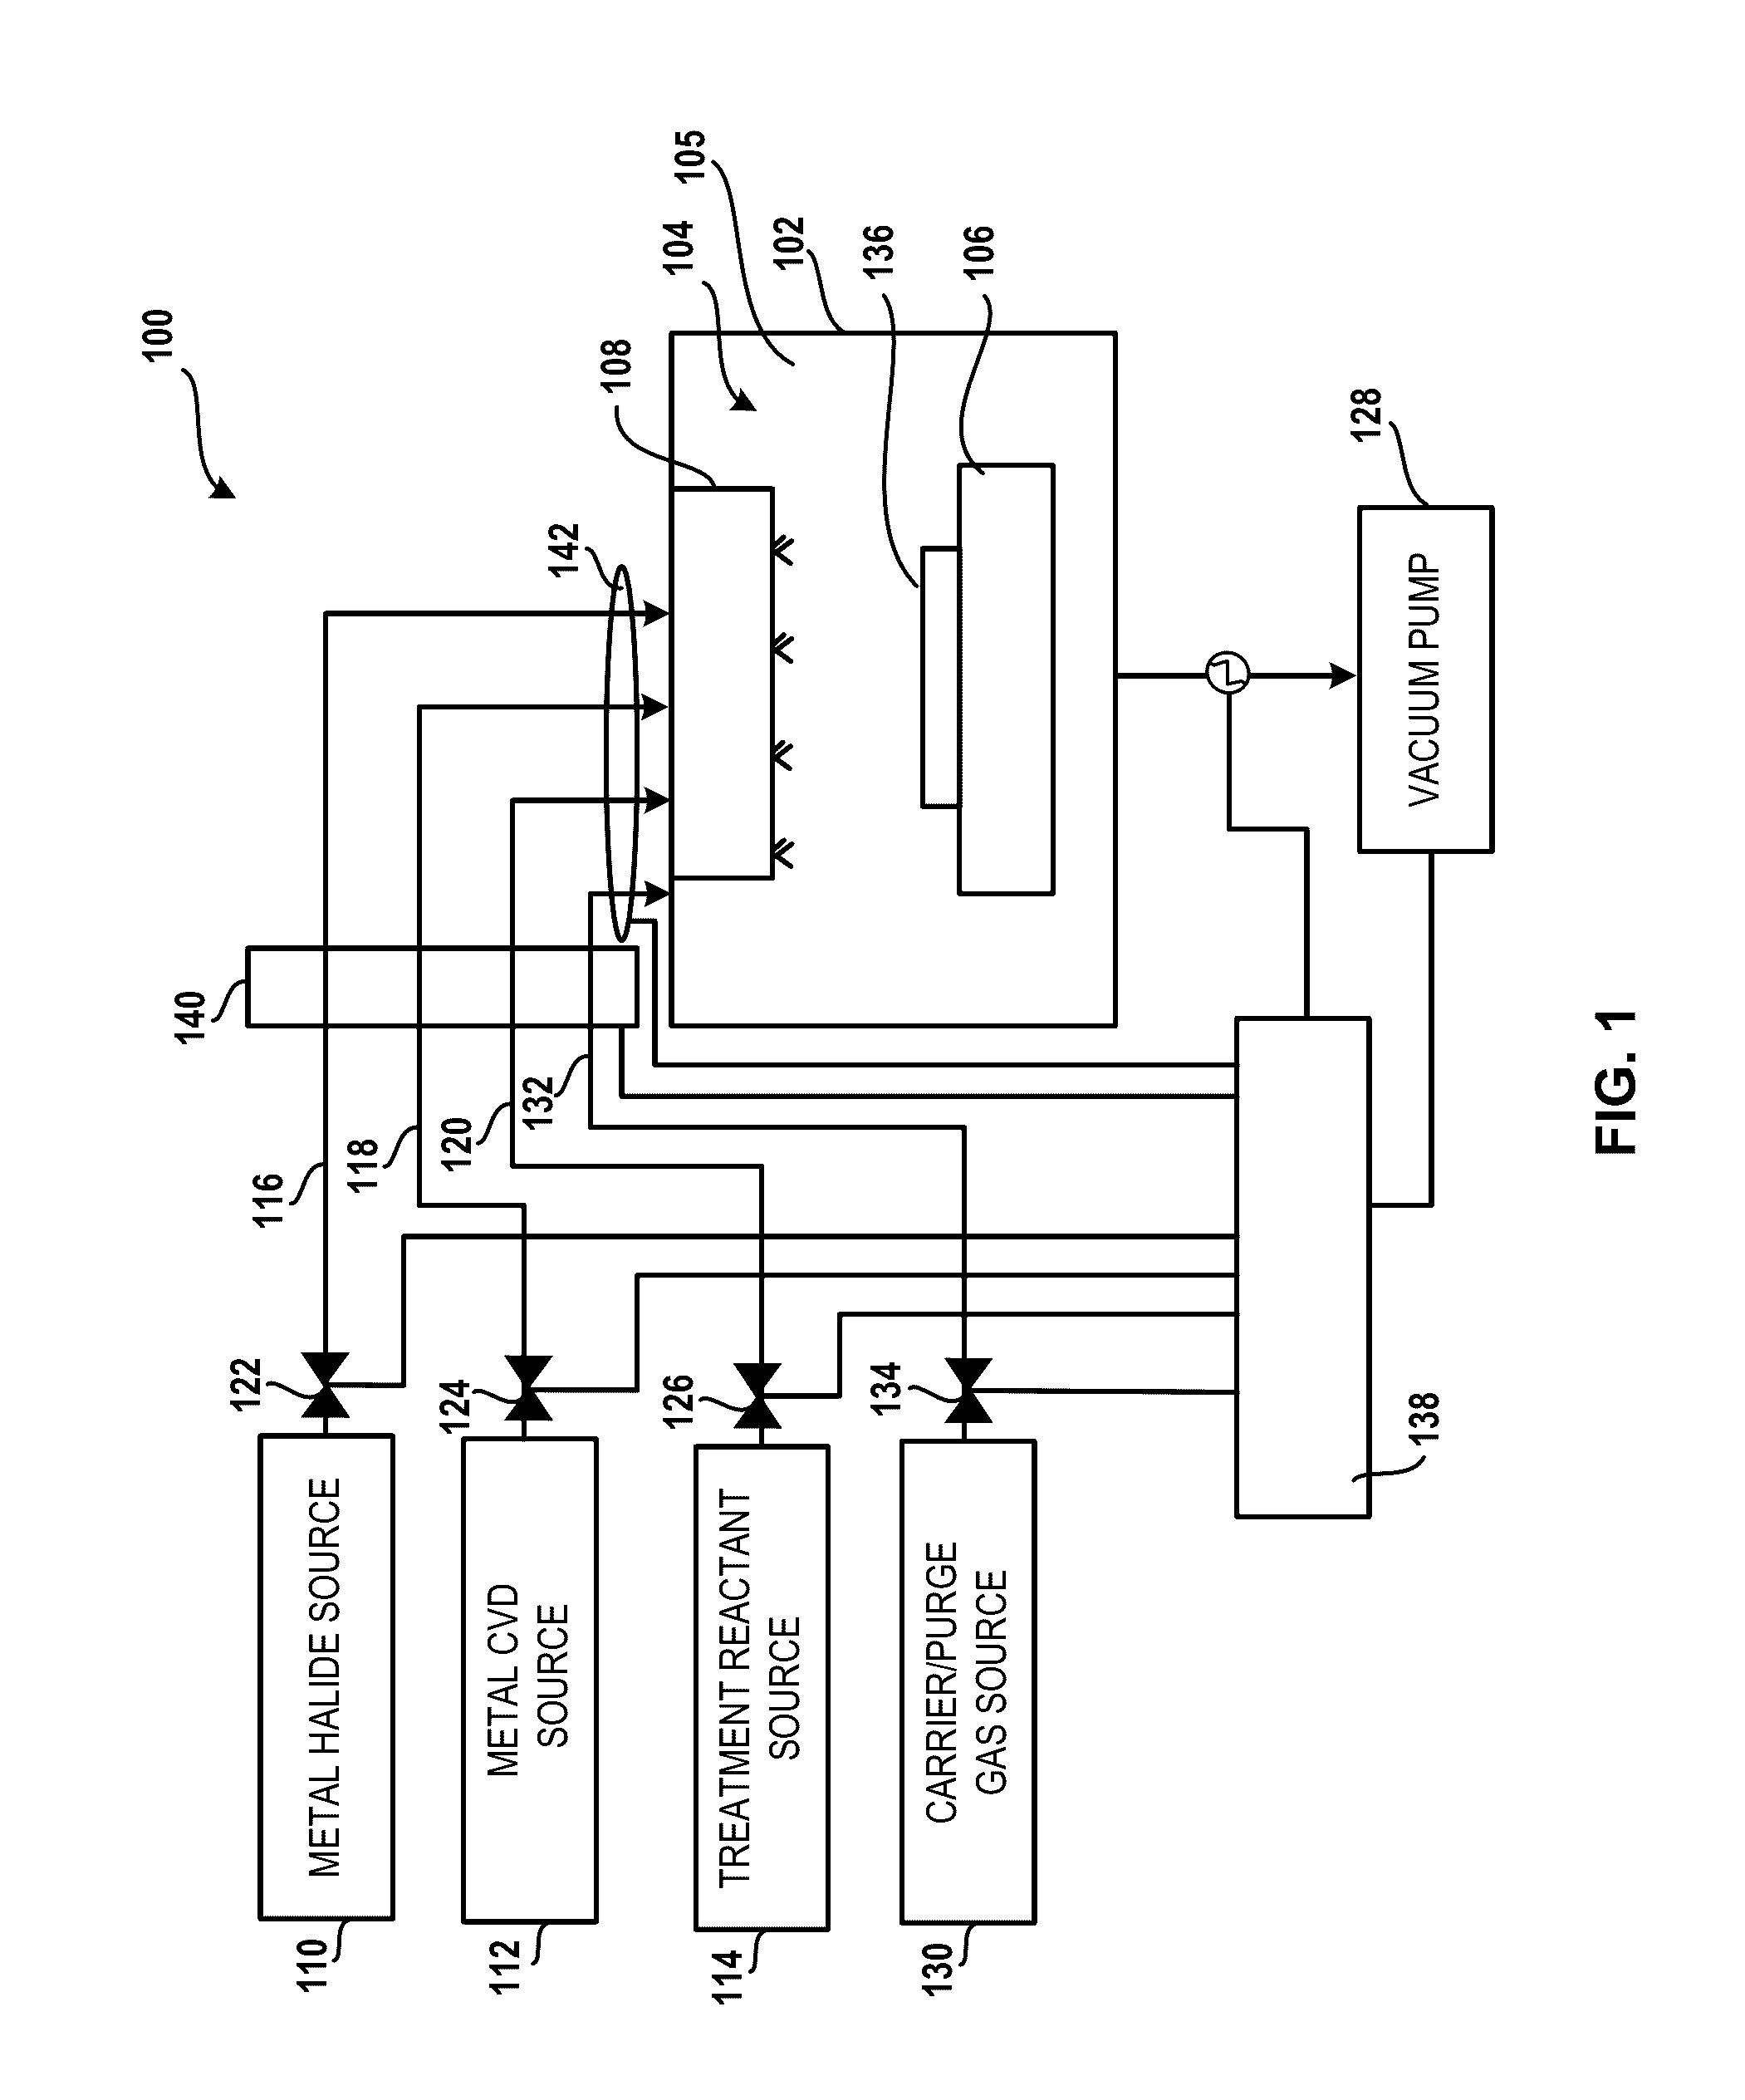 System for treatment of deposition reactor